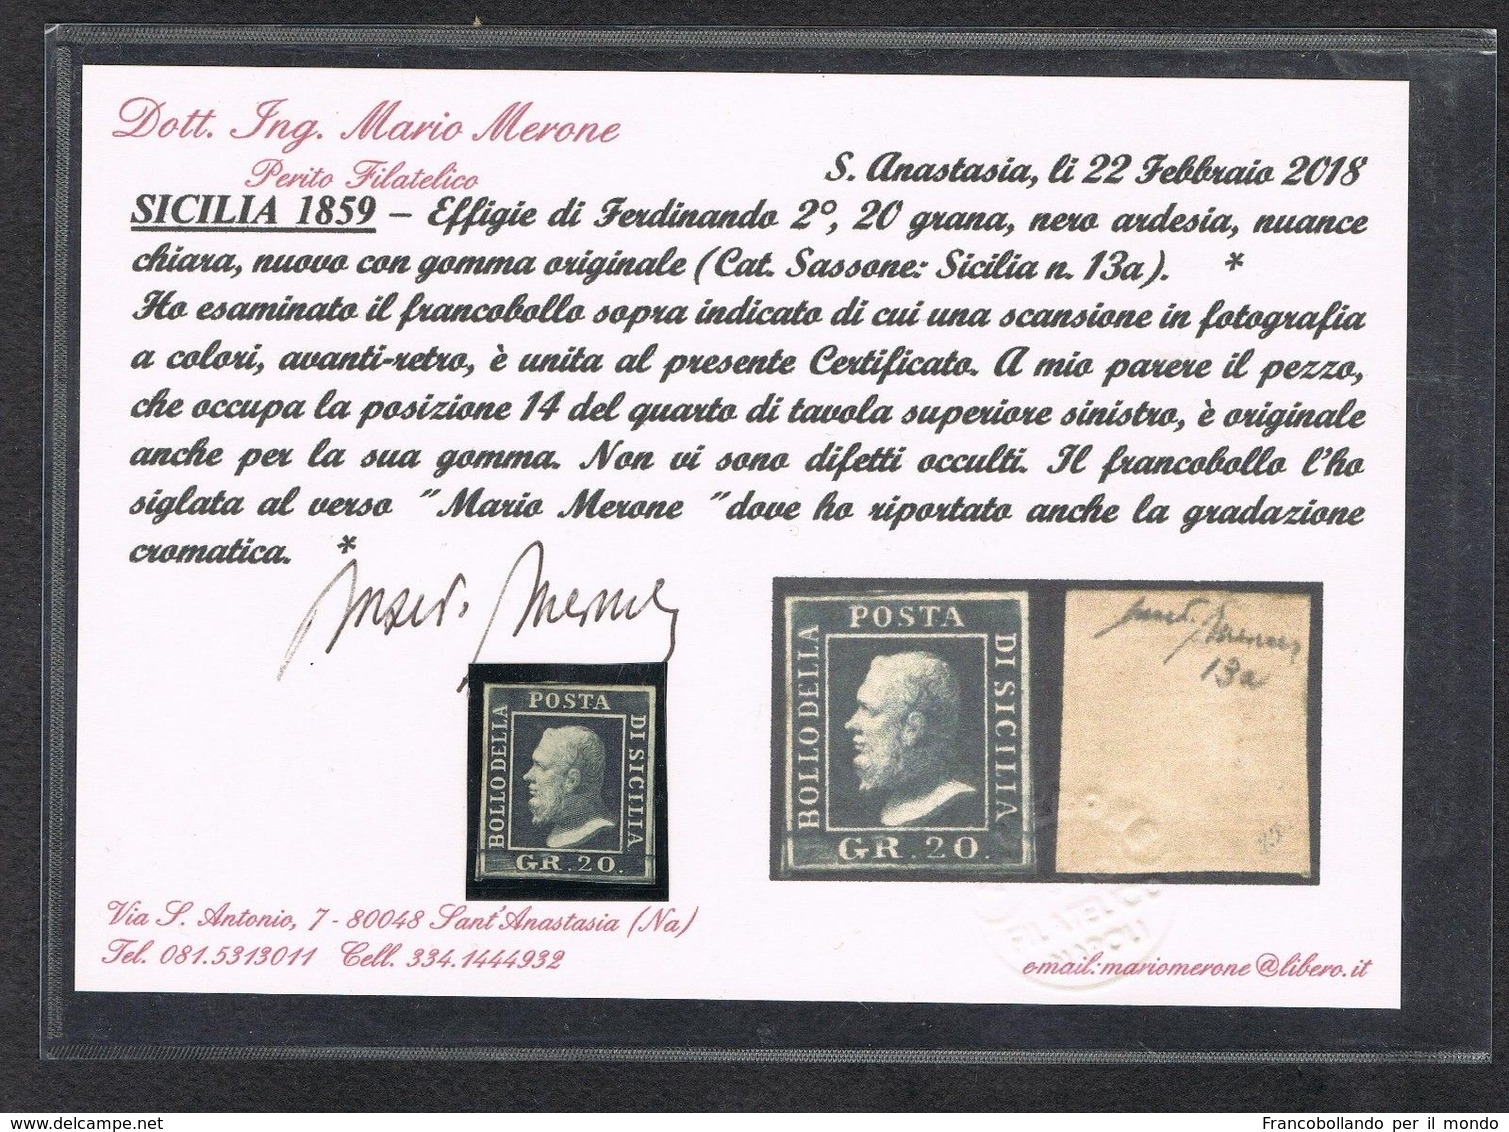 1859 OLD STATE ITALY SICILY 20 GRANA NOT USED OG CERTIFIED LUX STAMPS SASSONE 13 A POSITION PLATE 14 CATALOGUE € 14.000 - Sicile